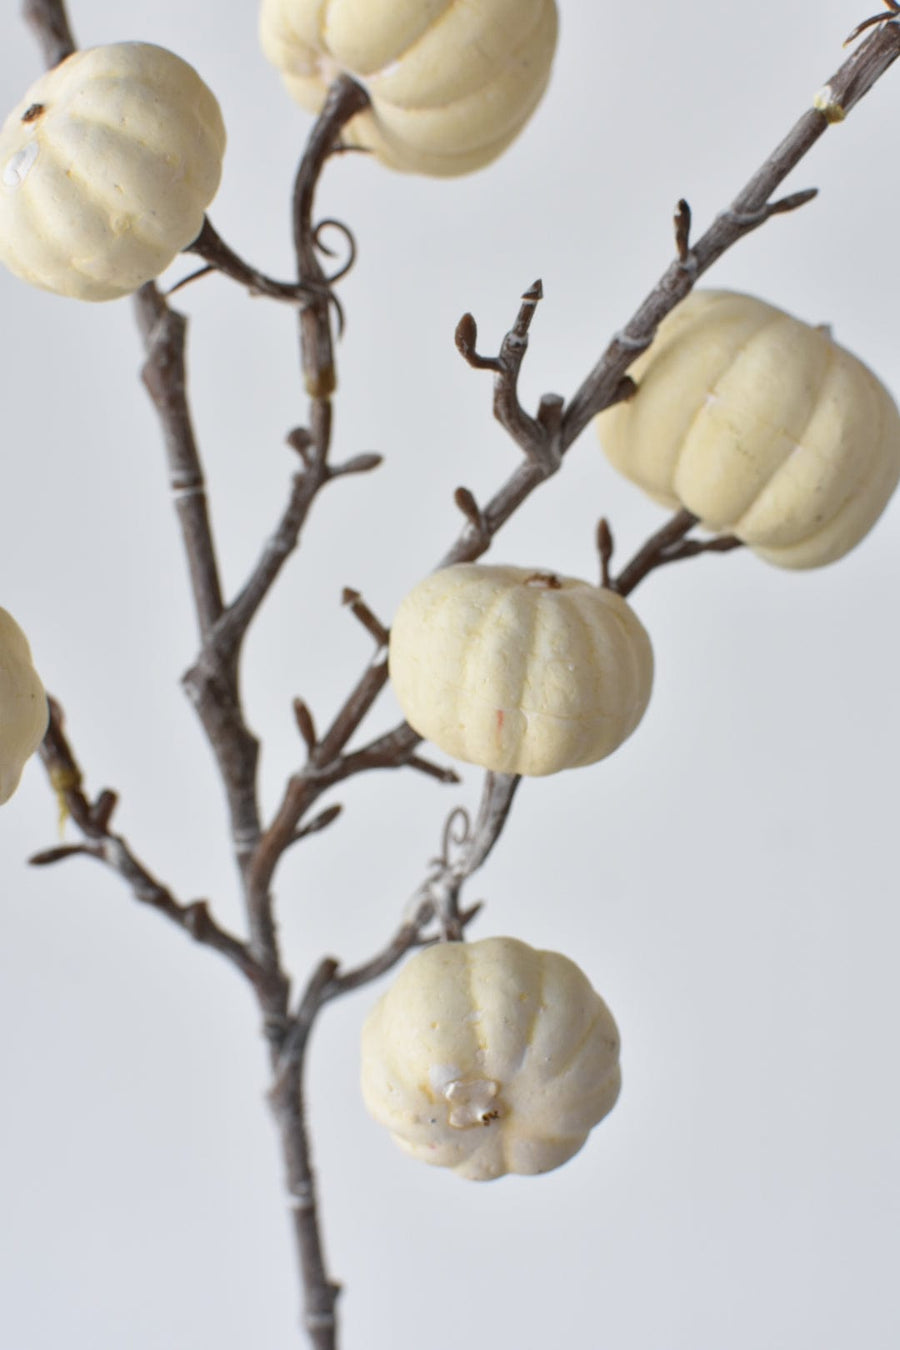 29" Faux White-Washed Pumkins On A Branch: Cream and White